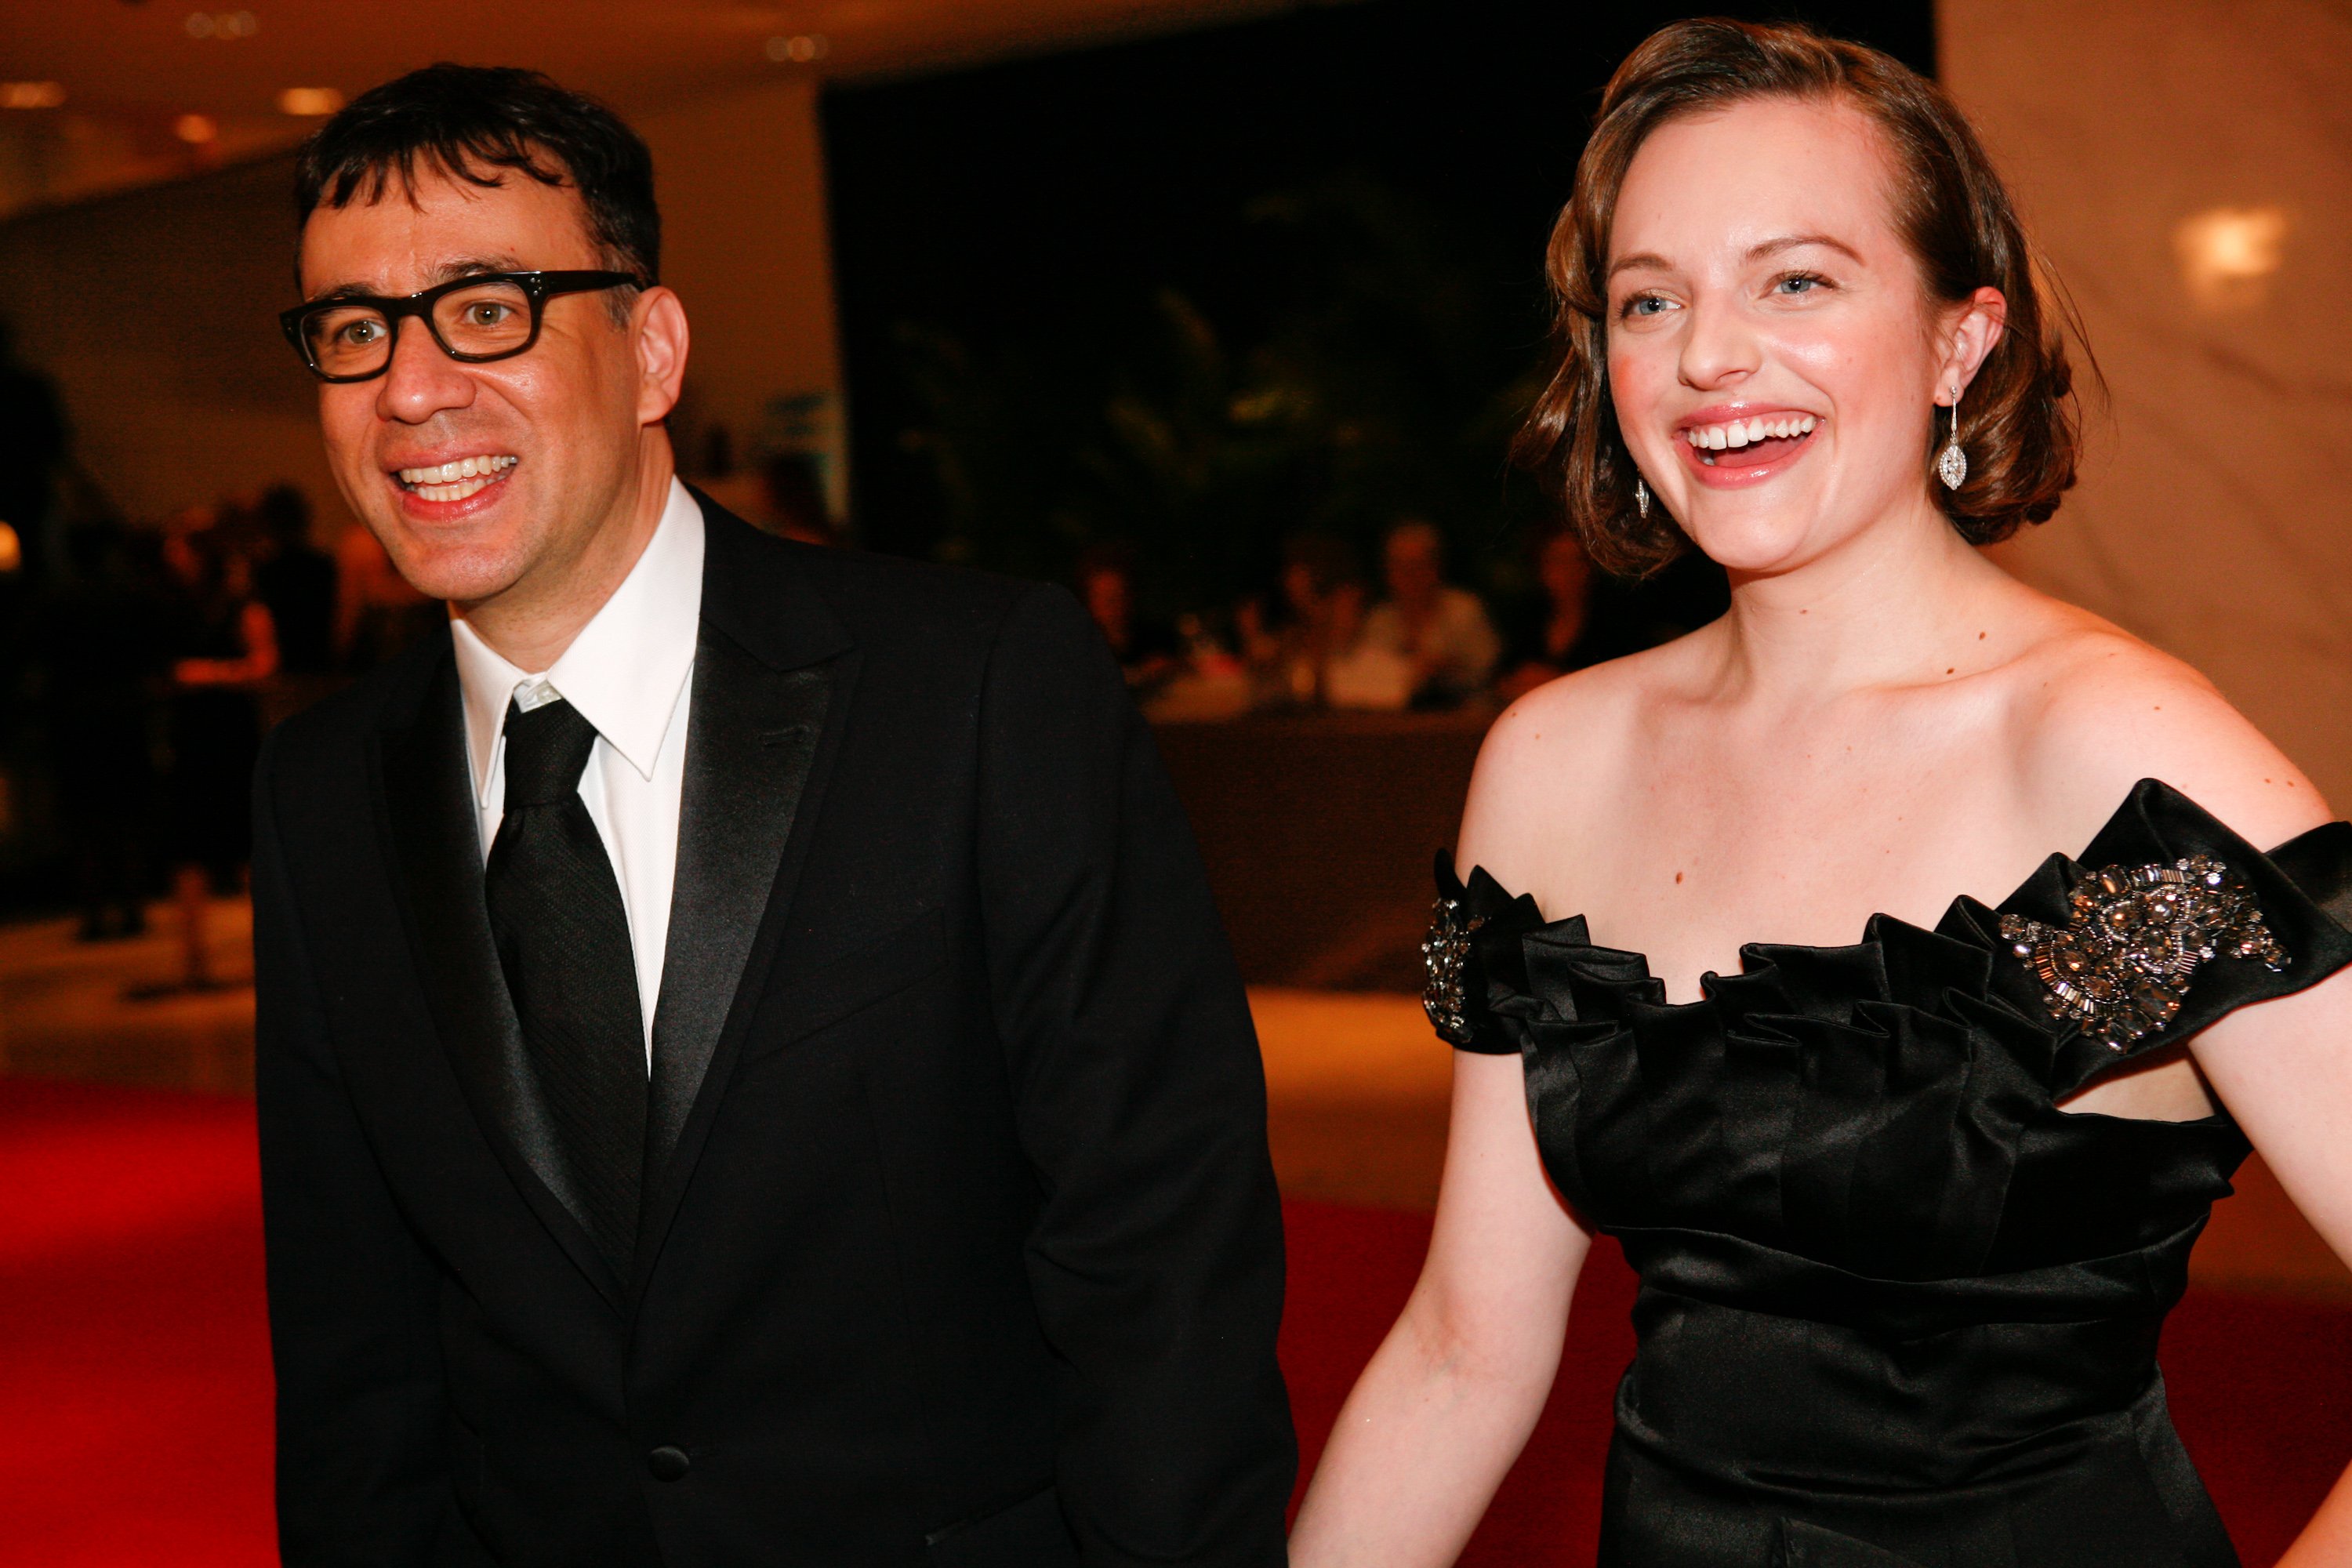 Fred Armisen and Elisabeth Moss at the White House Correspondents' Association dinner on May 1, 2010, in Washington, DC. I Source: Getty Images